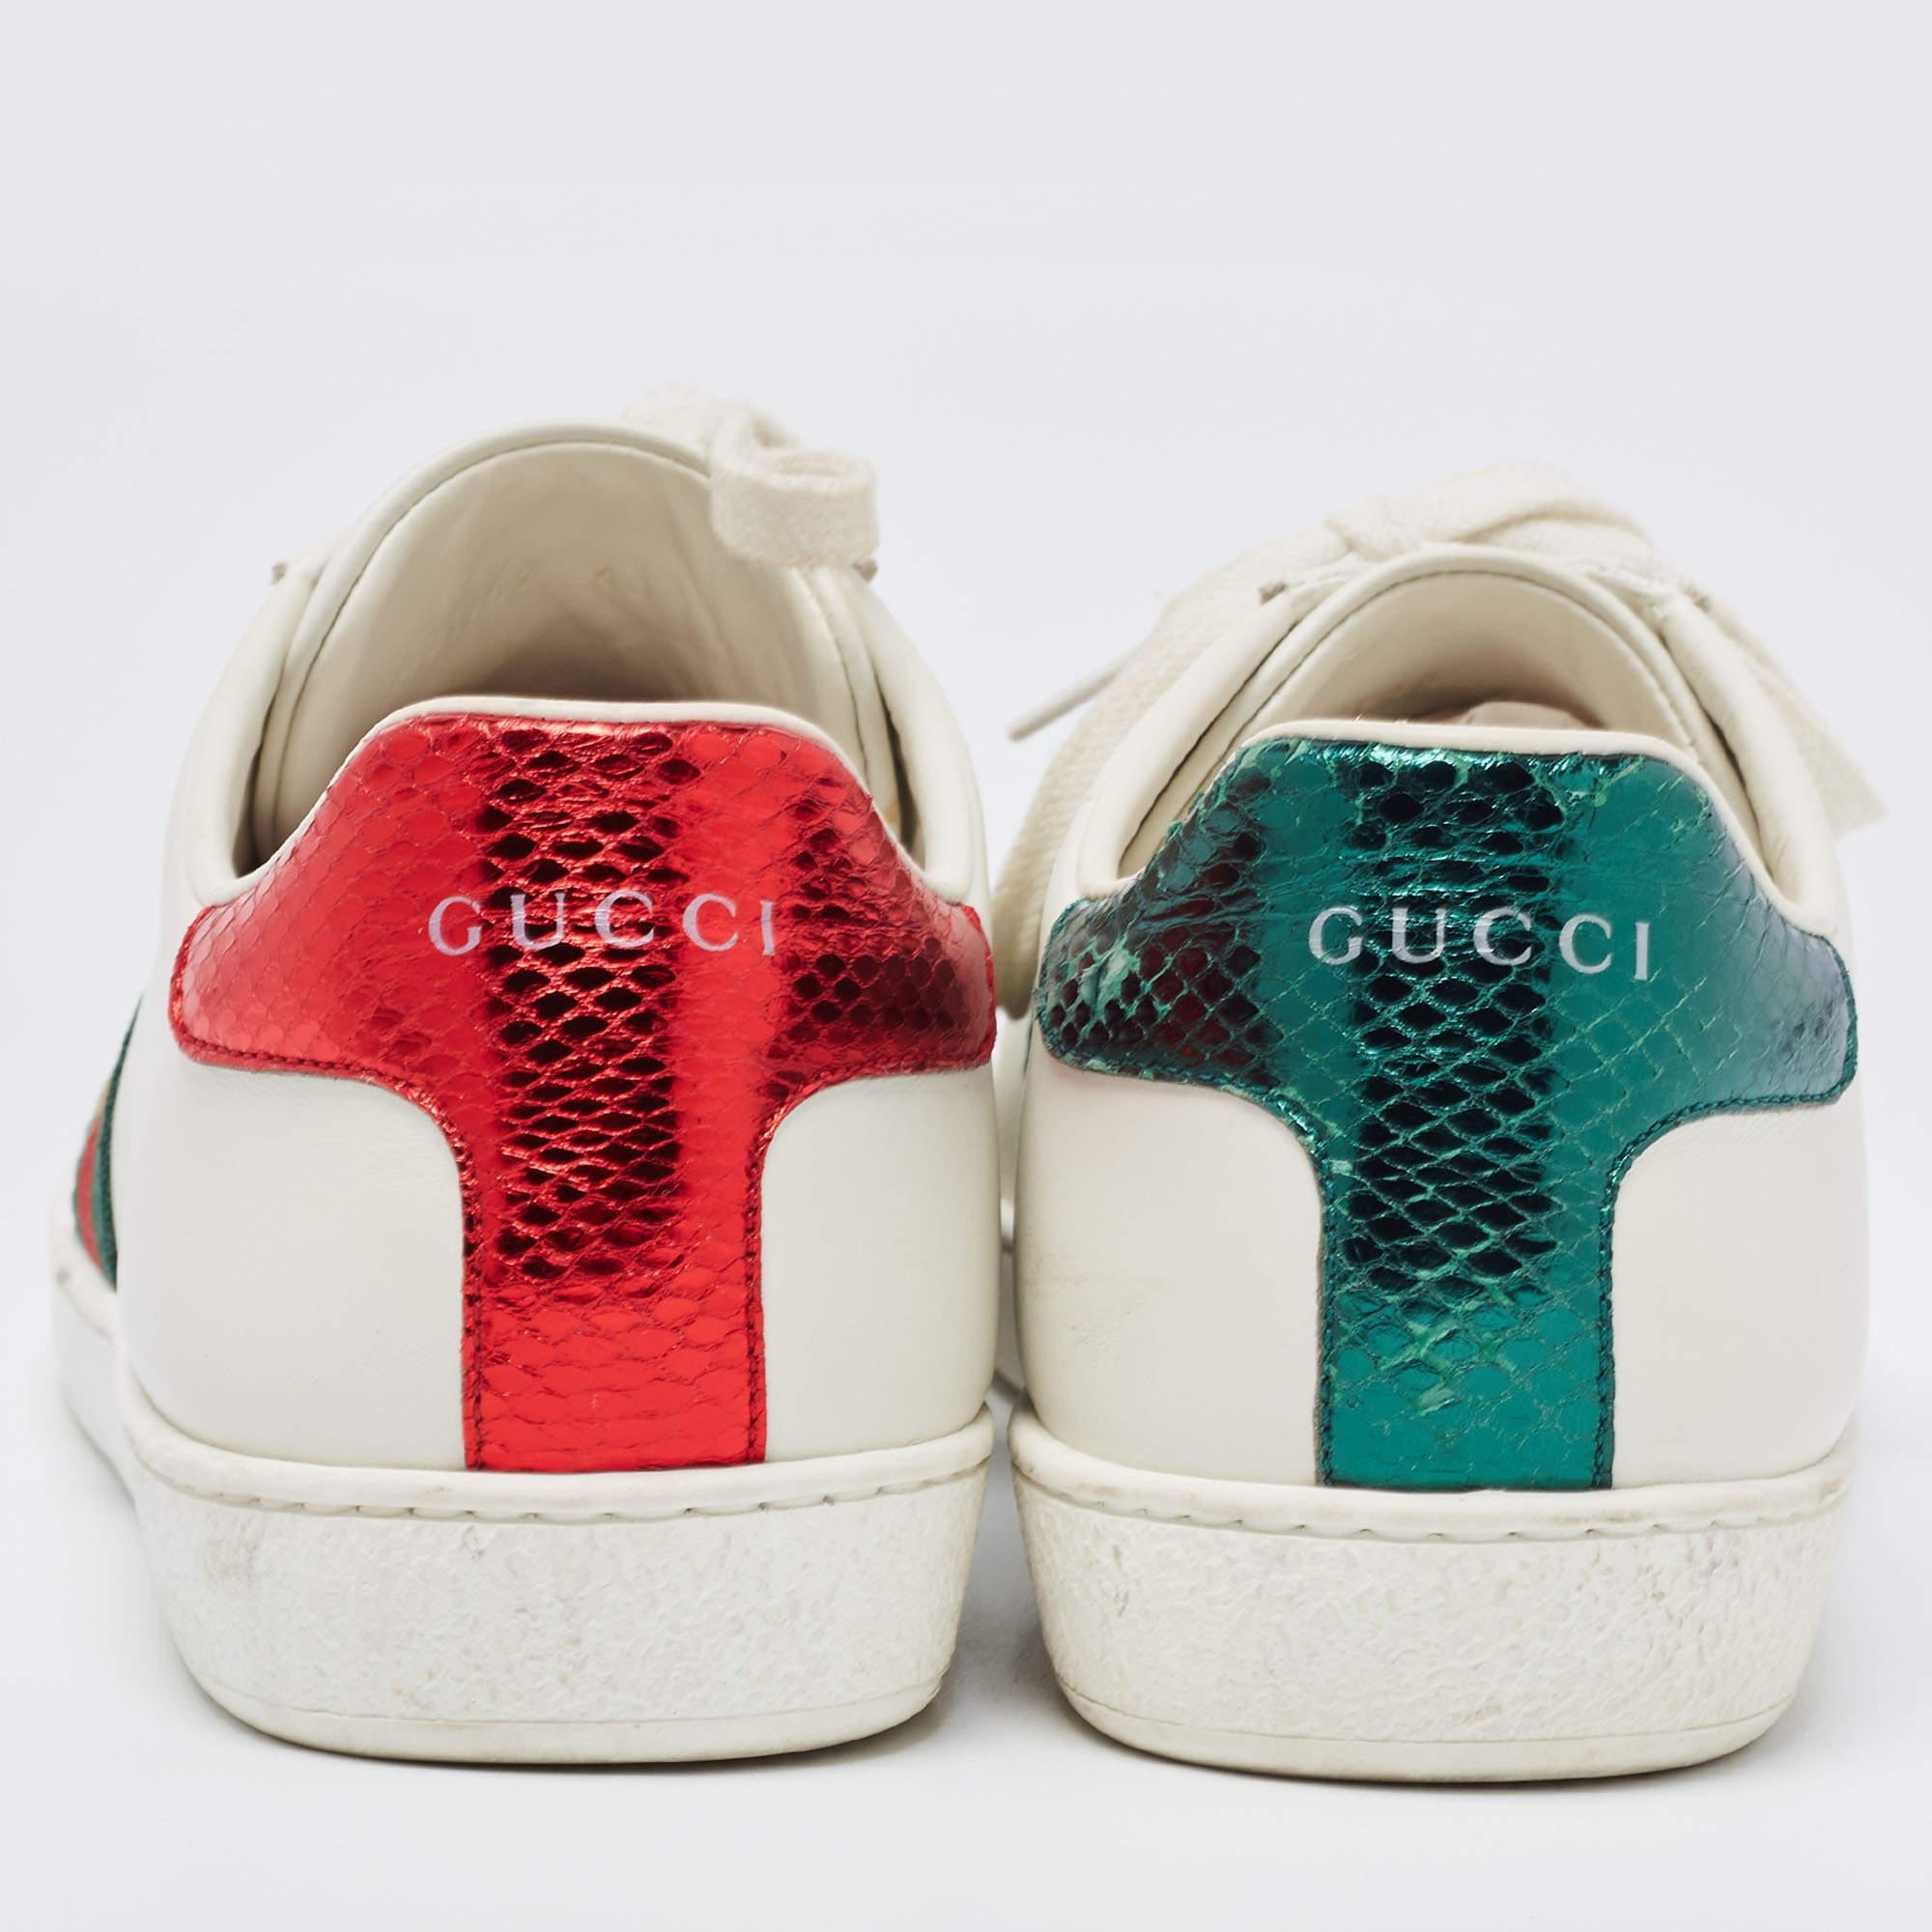 These sneakers from Gucci represent the idea of comfortable fashion. They are crafted from high-quality materials and designed with nothing but style. A perfect fit for all casual occasions, these sneakers will spruce up any look effortlessly.

